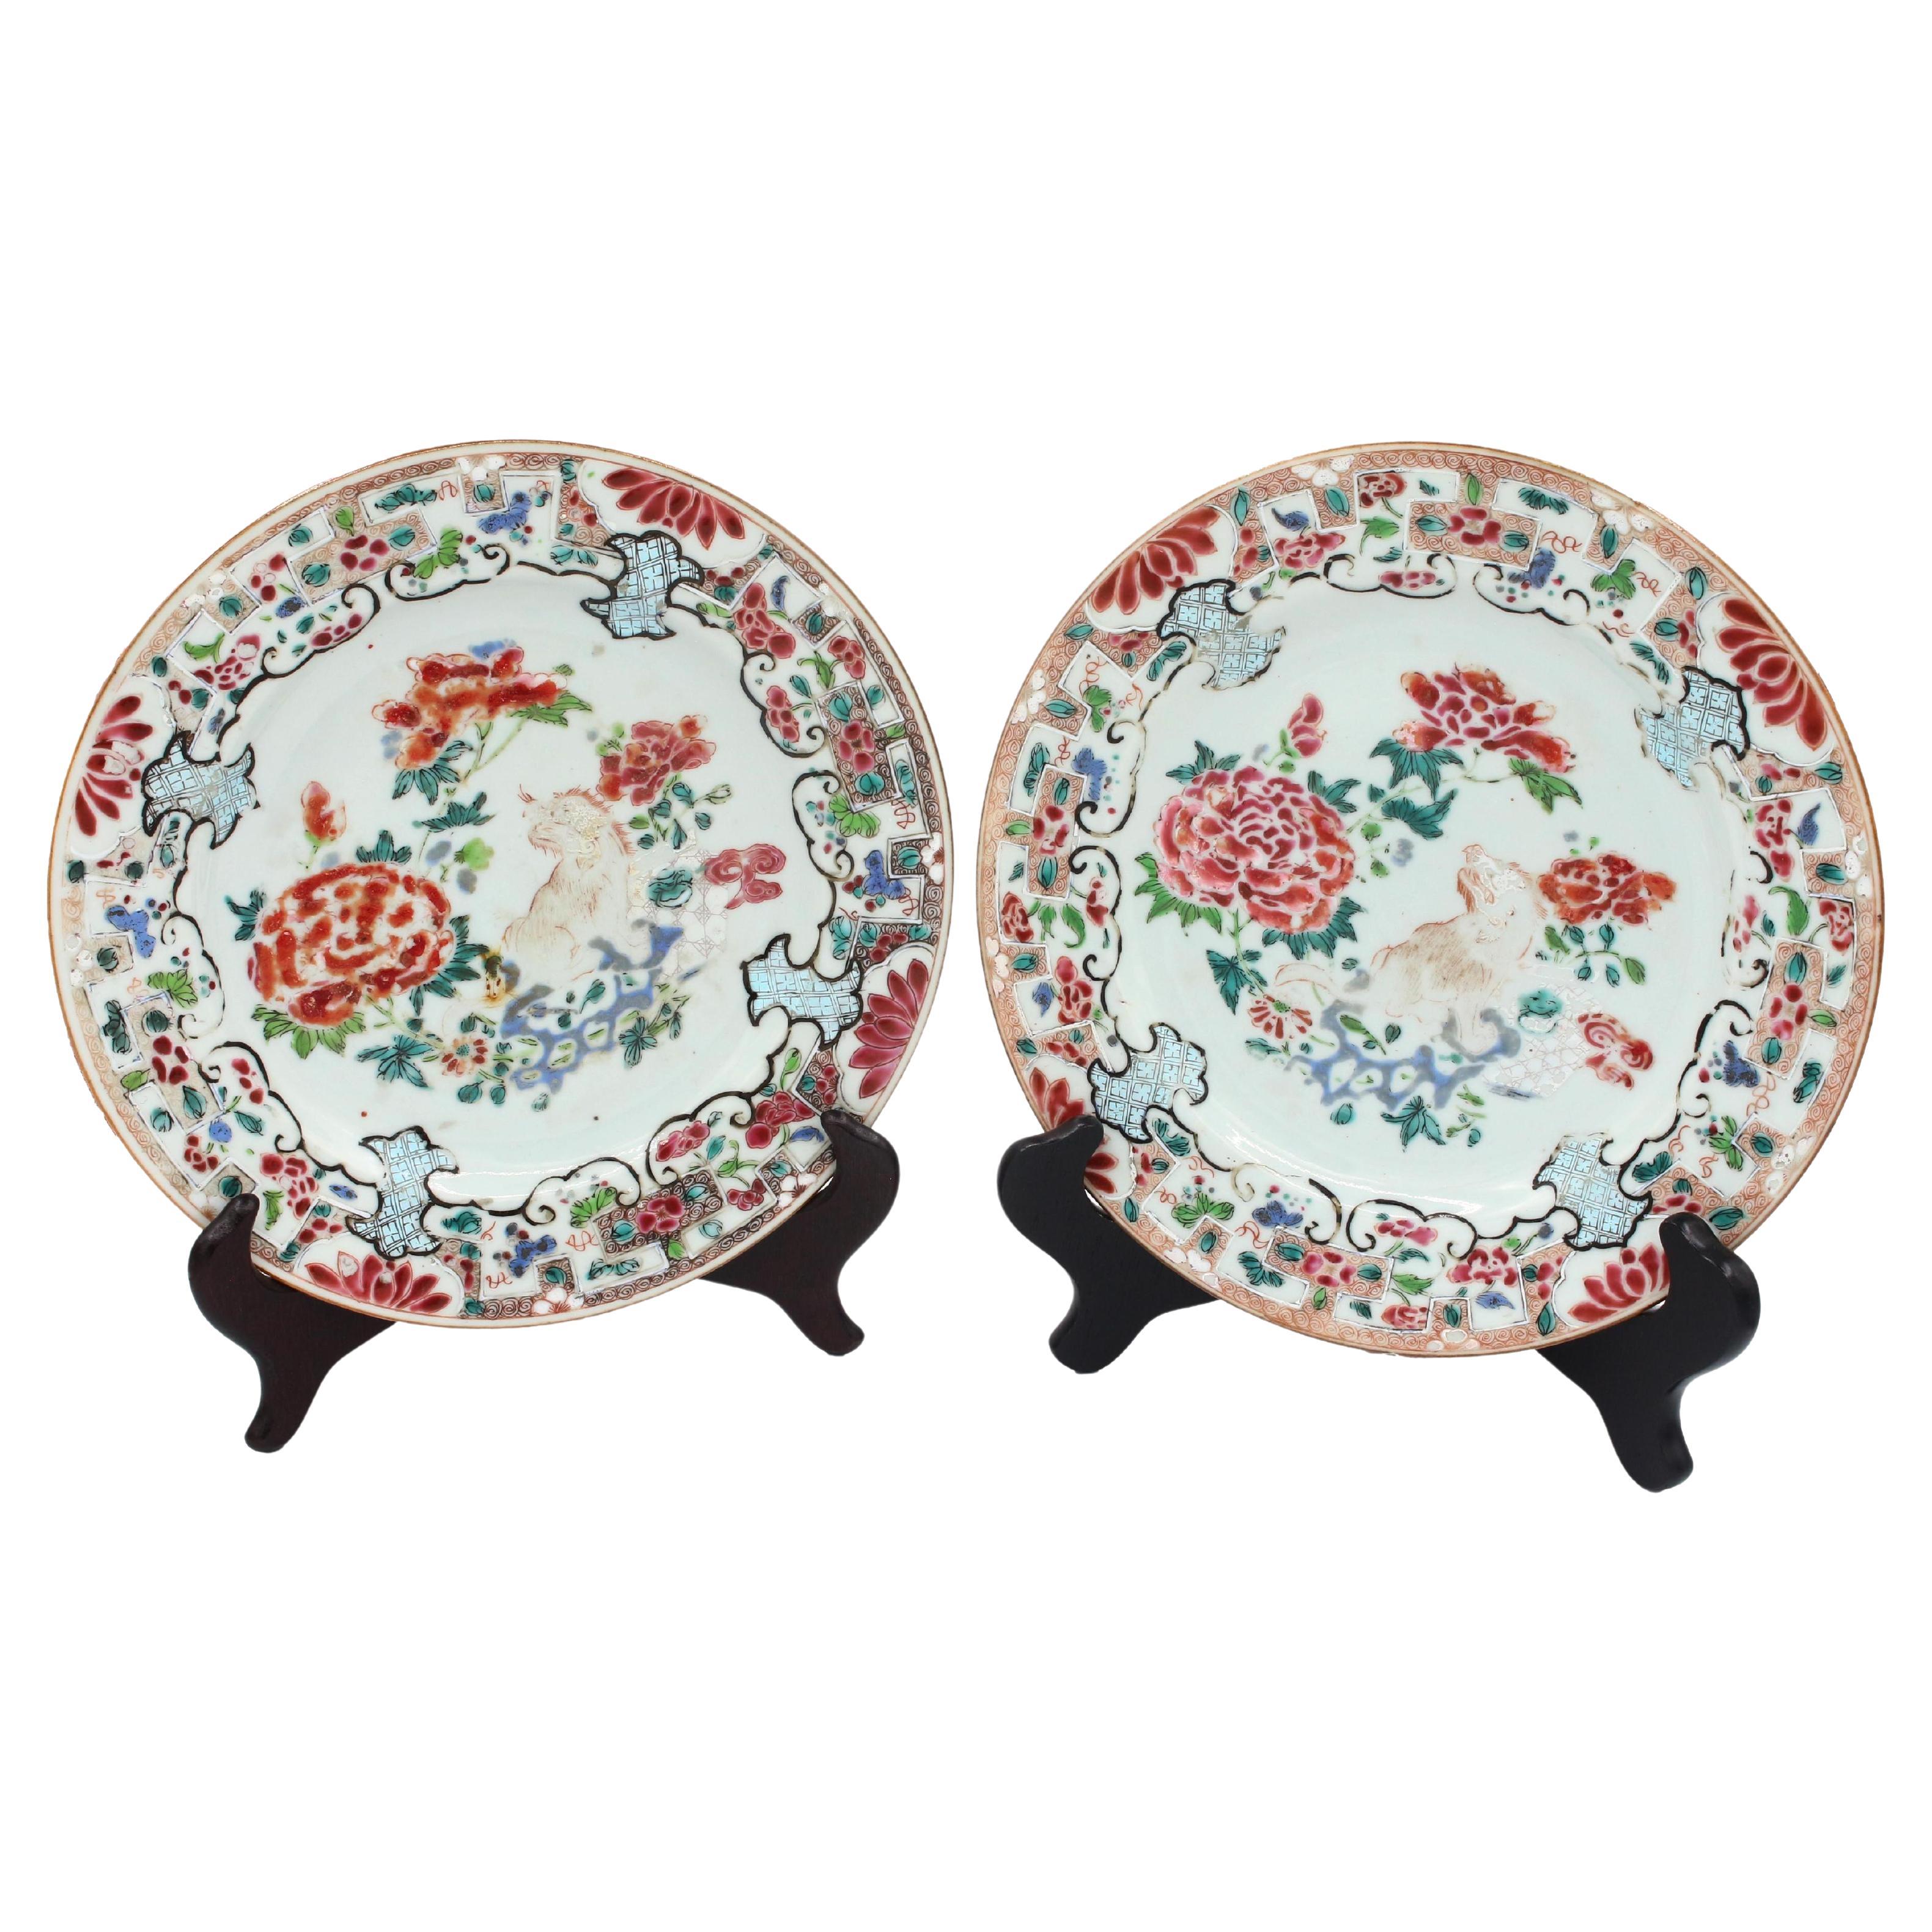 A Pair of Yongzheng Period Famille Rose Plates, Chinese, 1722-1735 For Sale